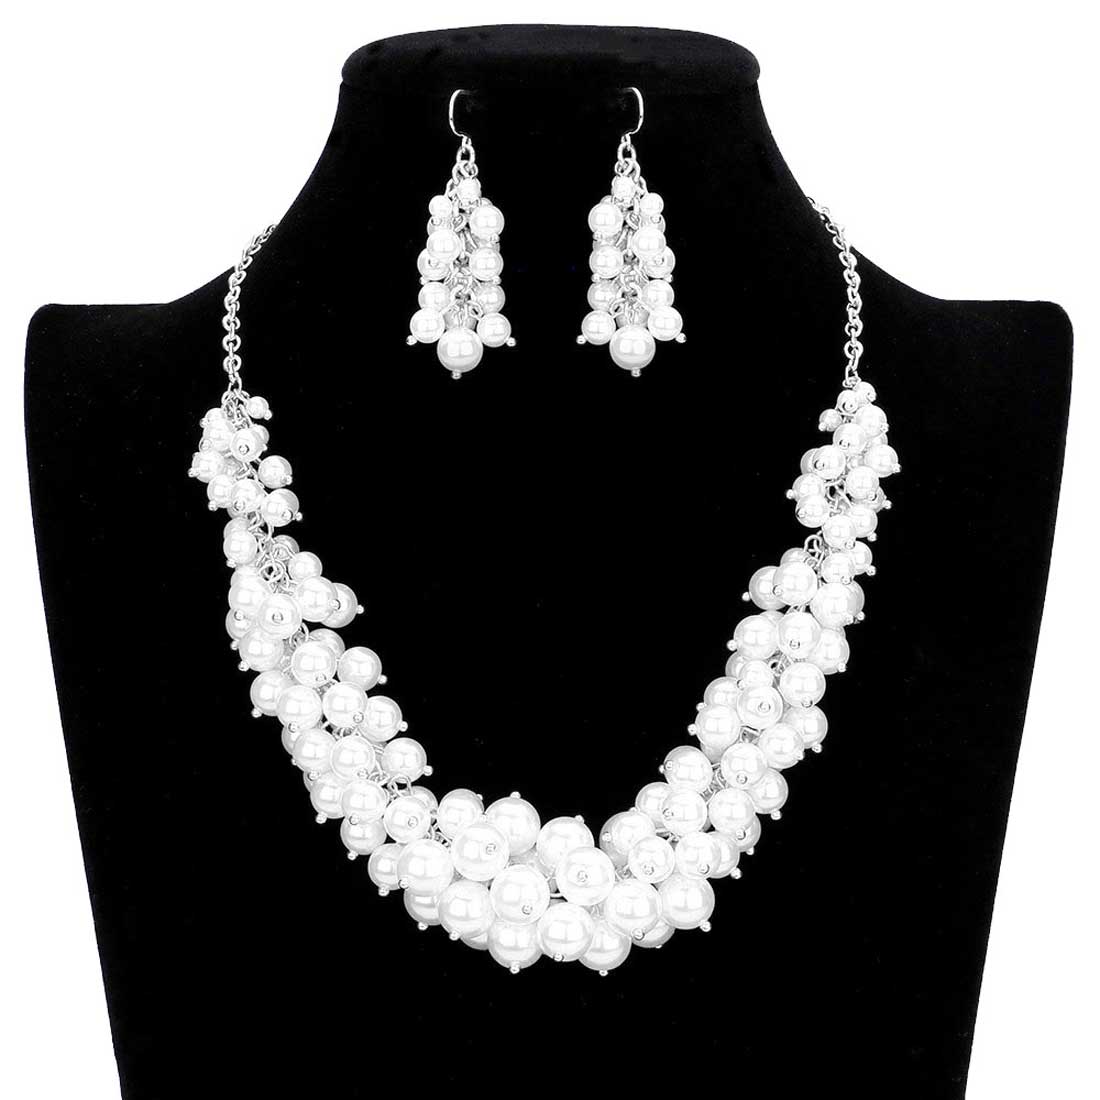 Silver Pearl Cluster Necklace. These gorgeous Pearl pieces will show your class in any special occasion. The elegance of these pearl goes unmatched, great for wearing at a party! Perfect jewelry to enhance your look. Awesome gift for birthday, Anniversary, Valentine’s Day or any special occasion.